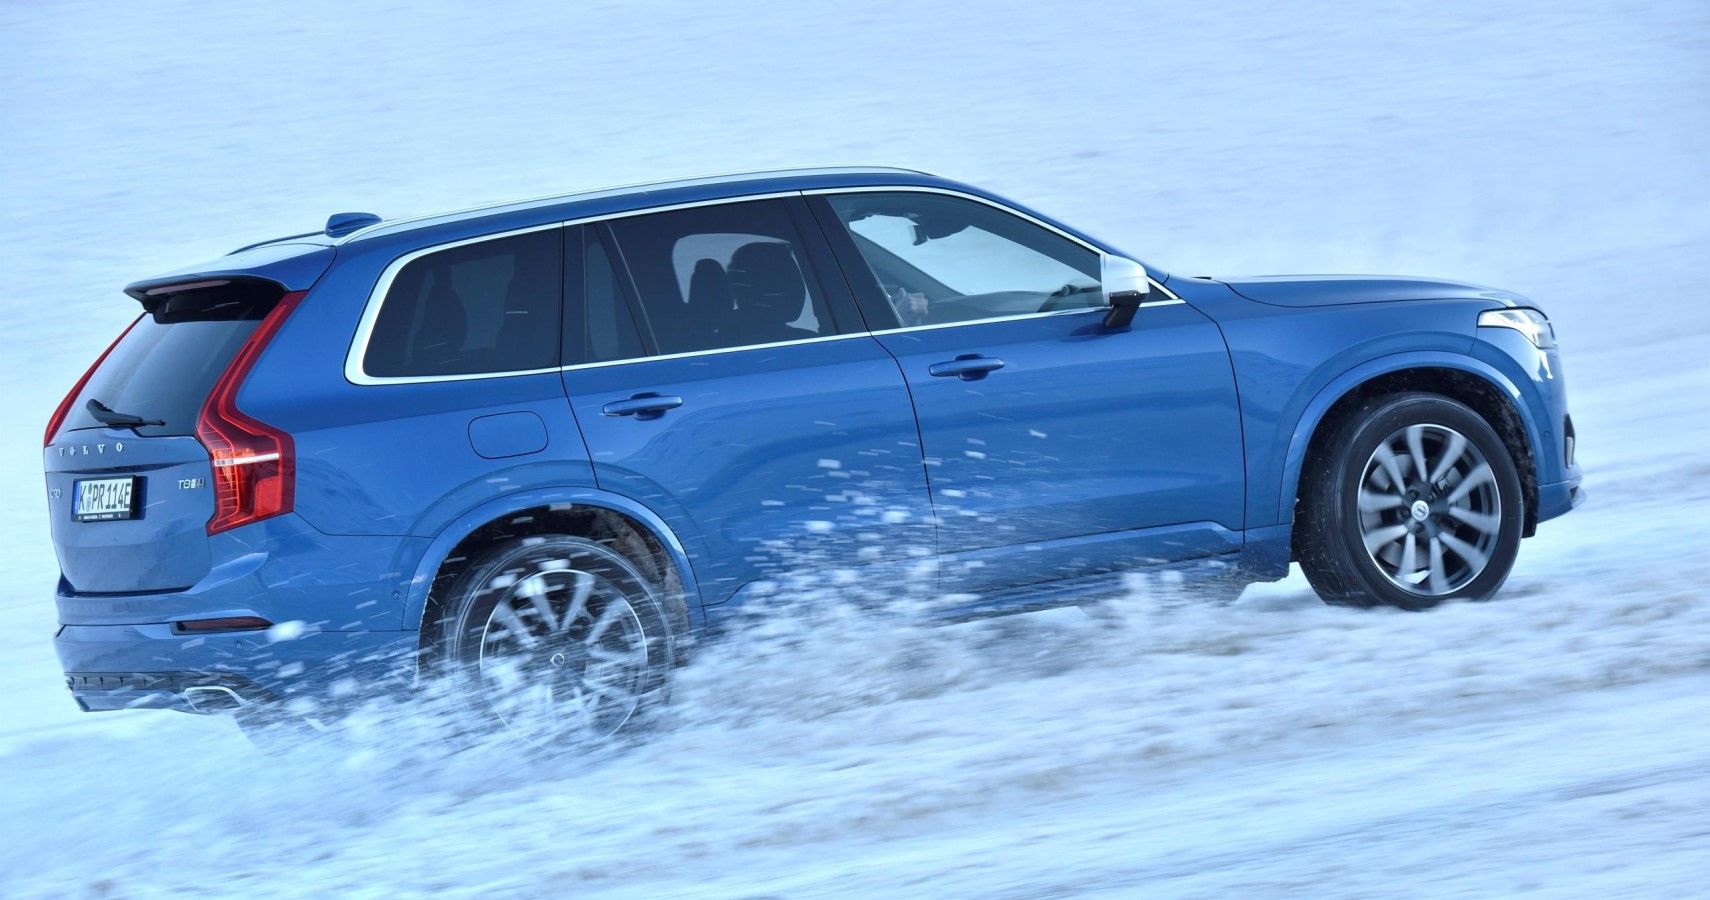 2017 Volvo XC90 driving in snow side view